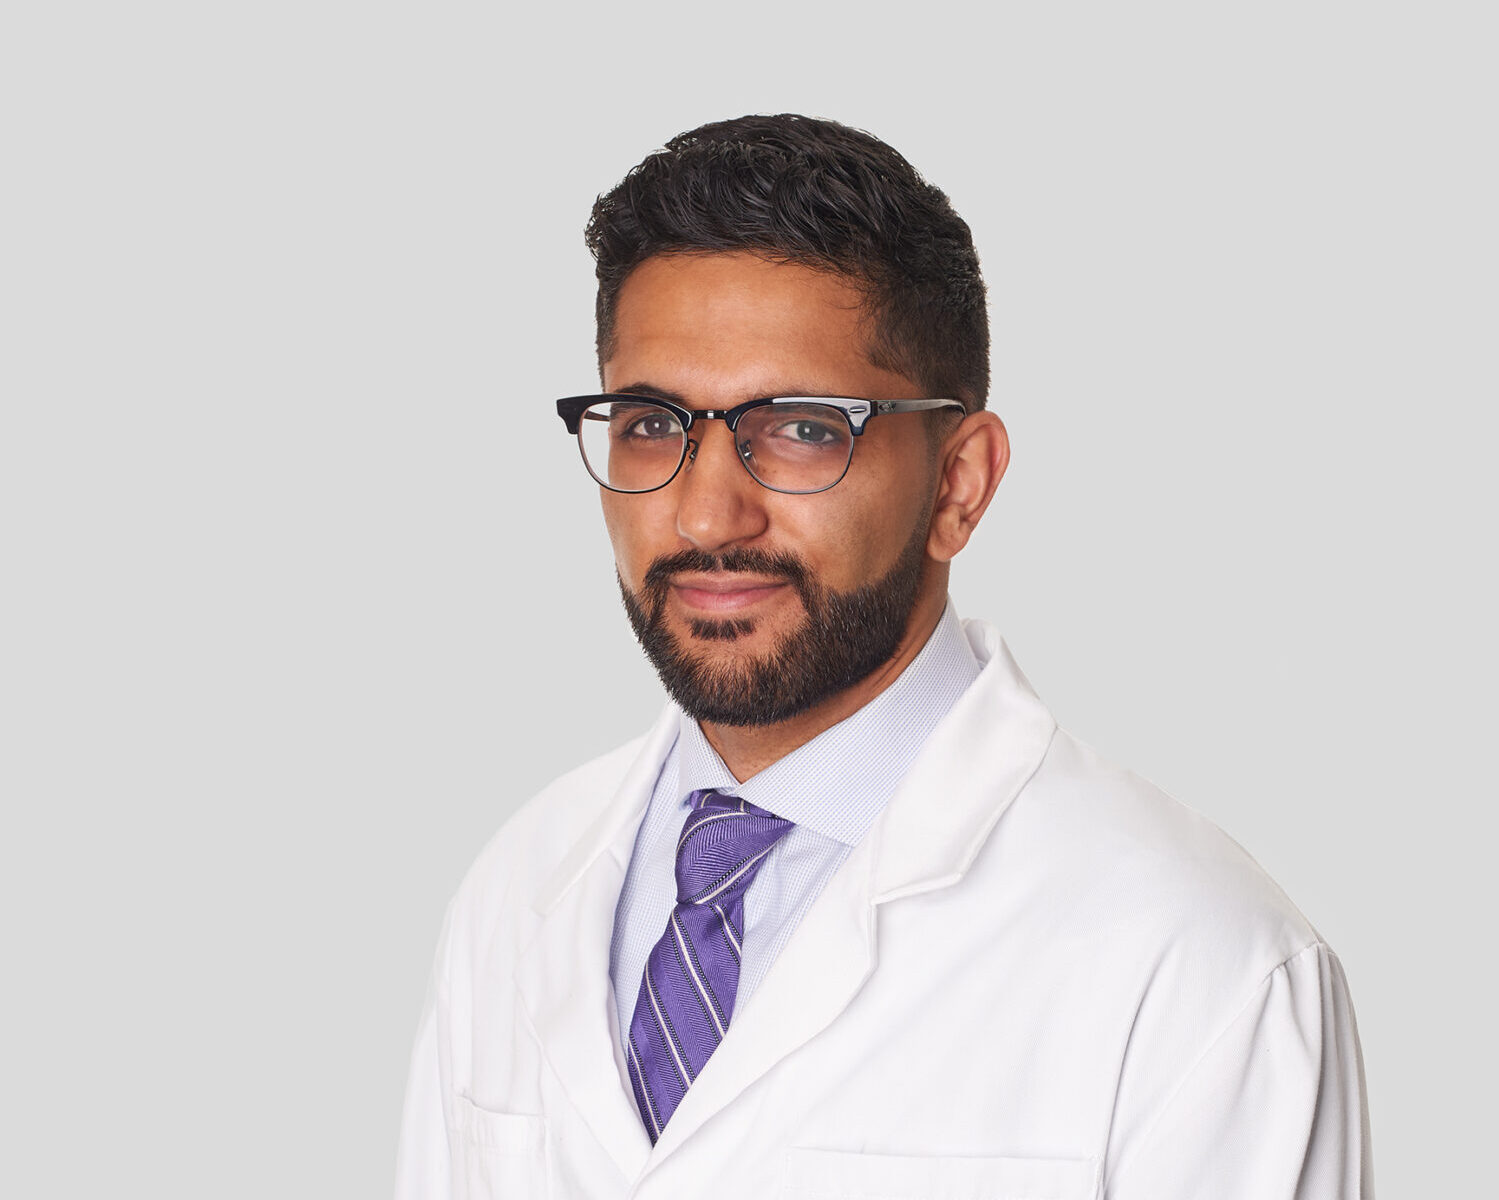 Dr. Amit Sidhu of the Animal Medical Center in New York City